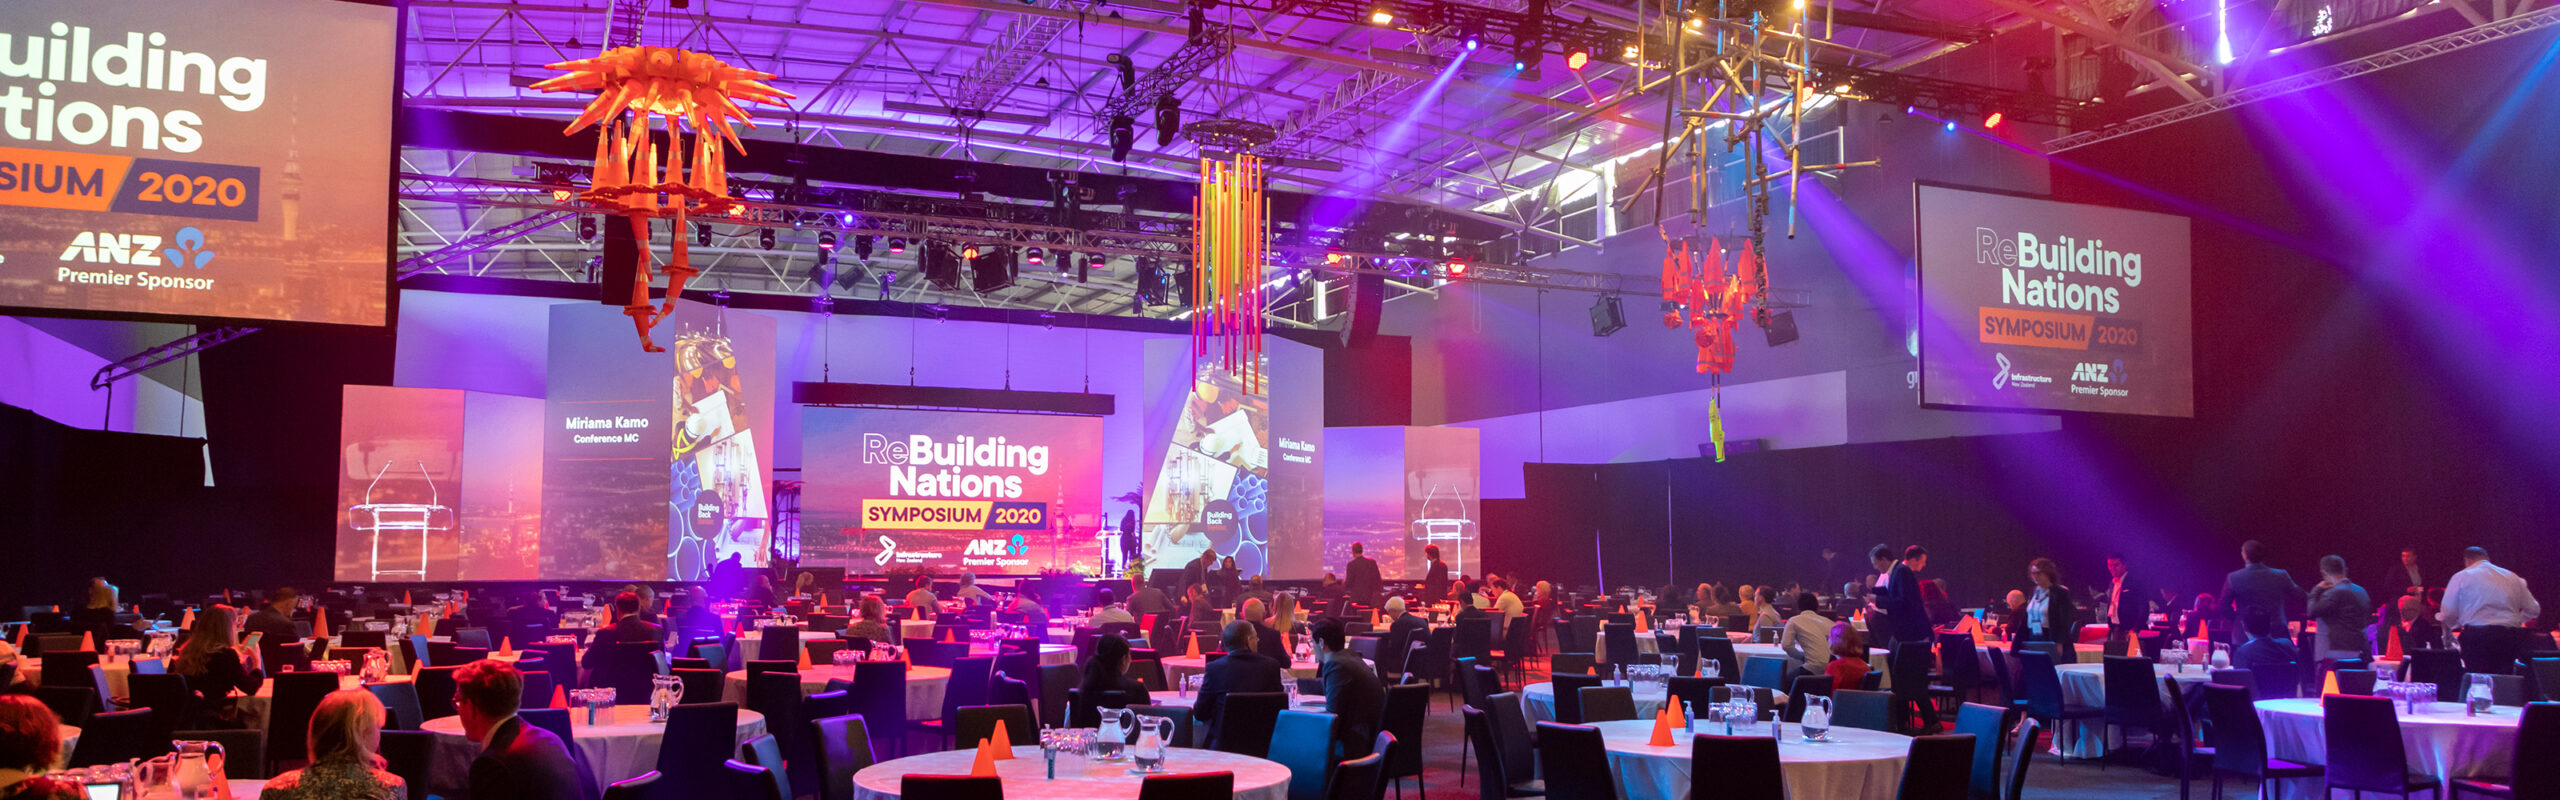 Cut the Mustard Major Event // National Building Nations Symposium 2020